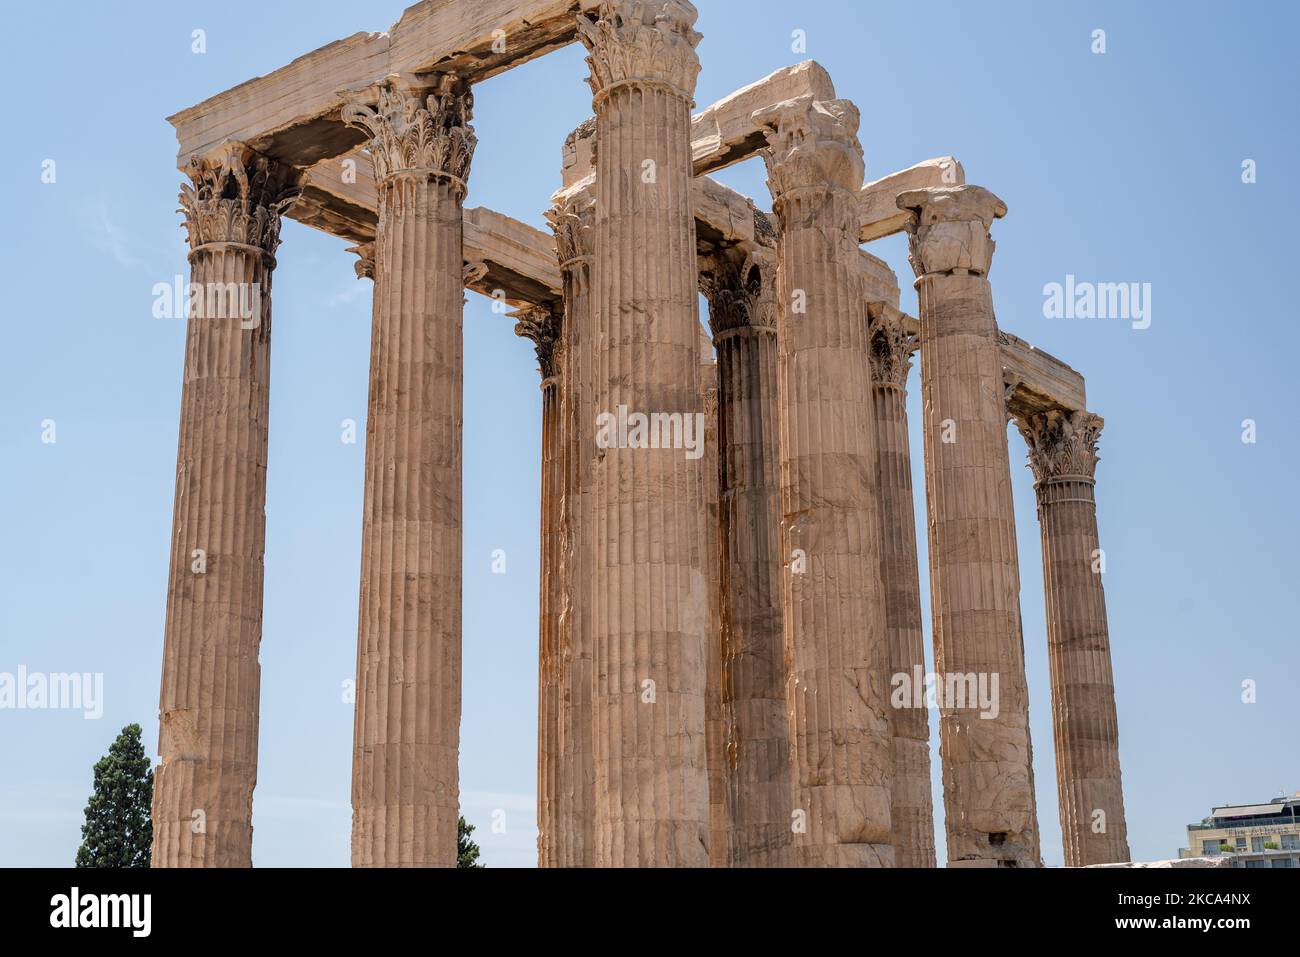 Greece - Temple of Zeus ruins in Athens. Stock Photo